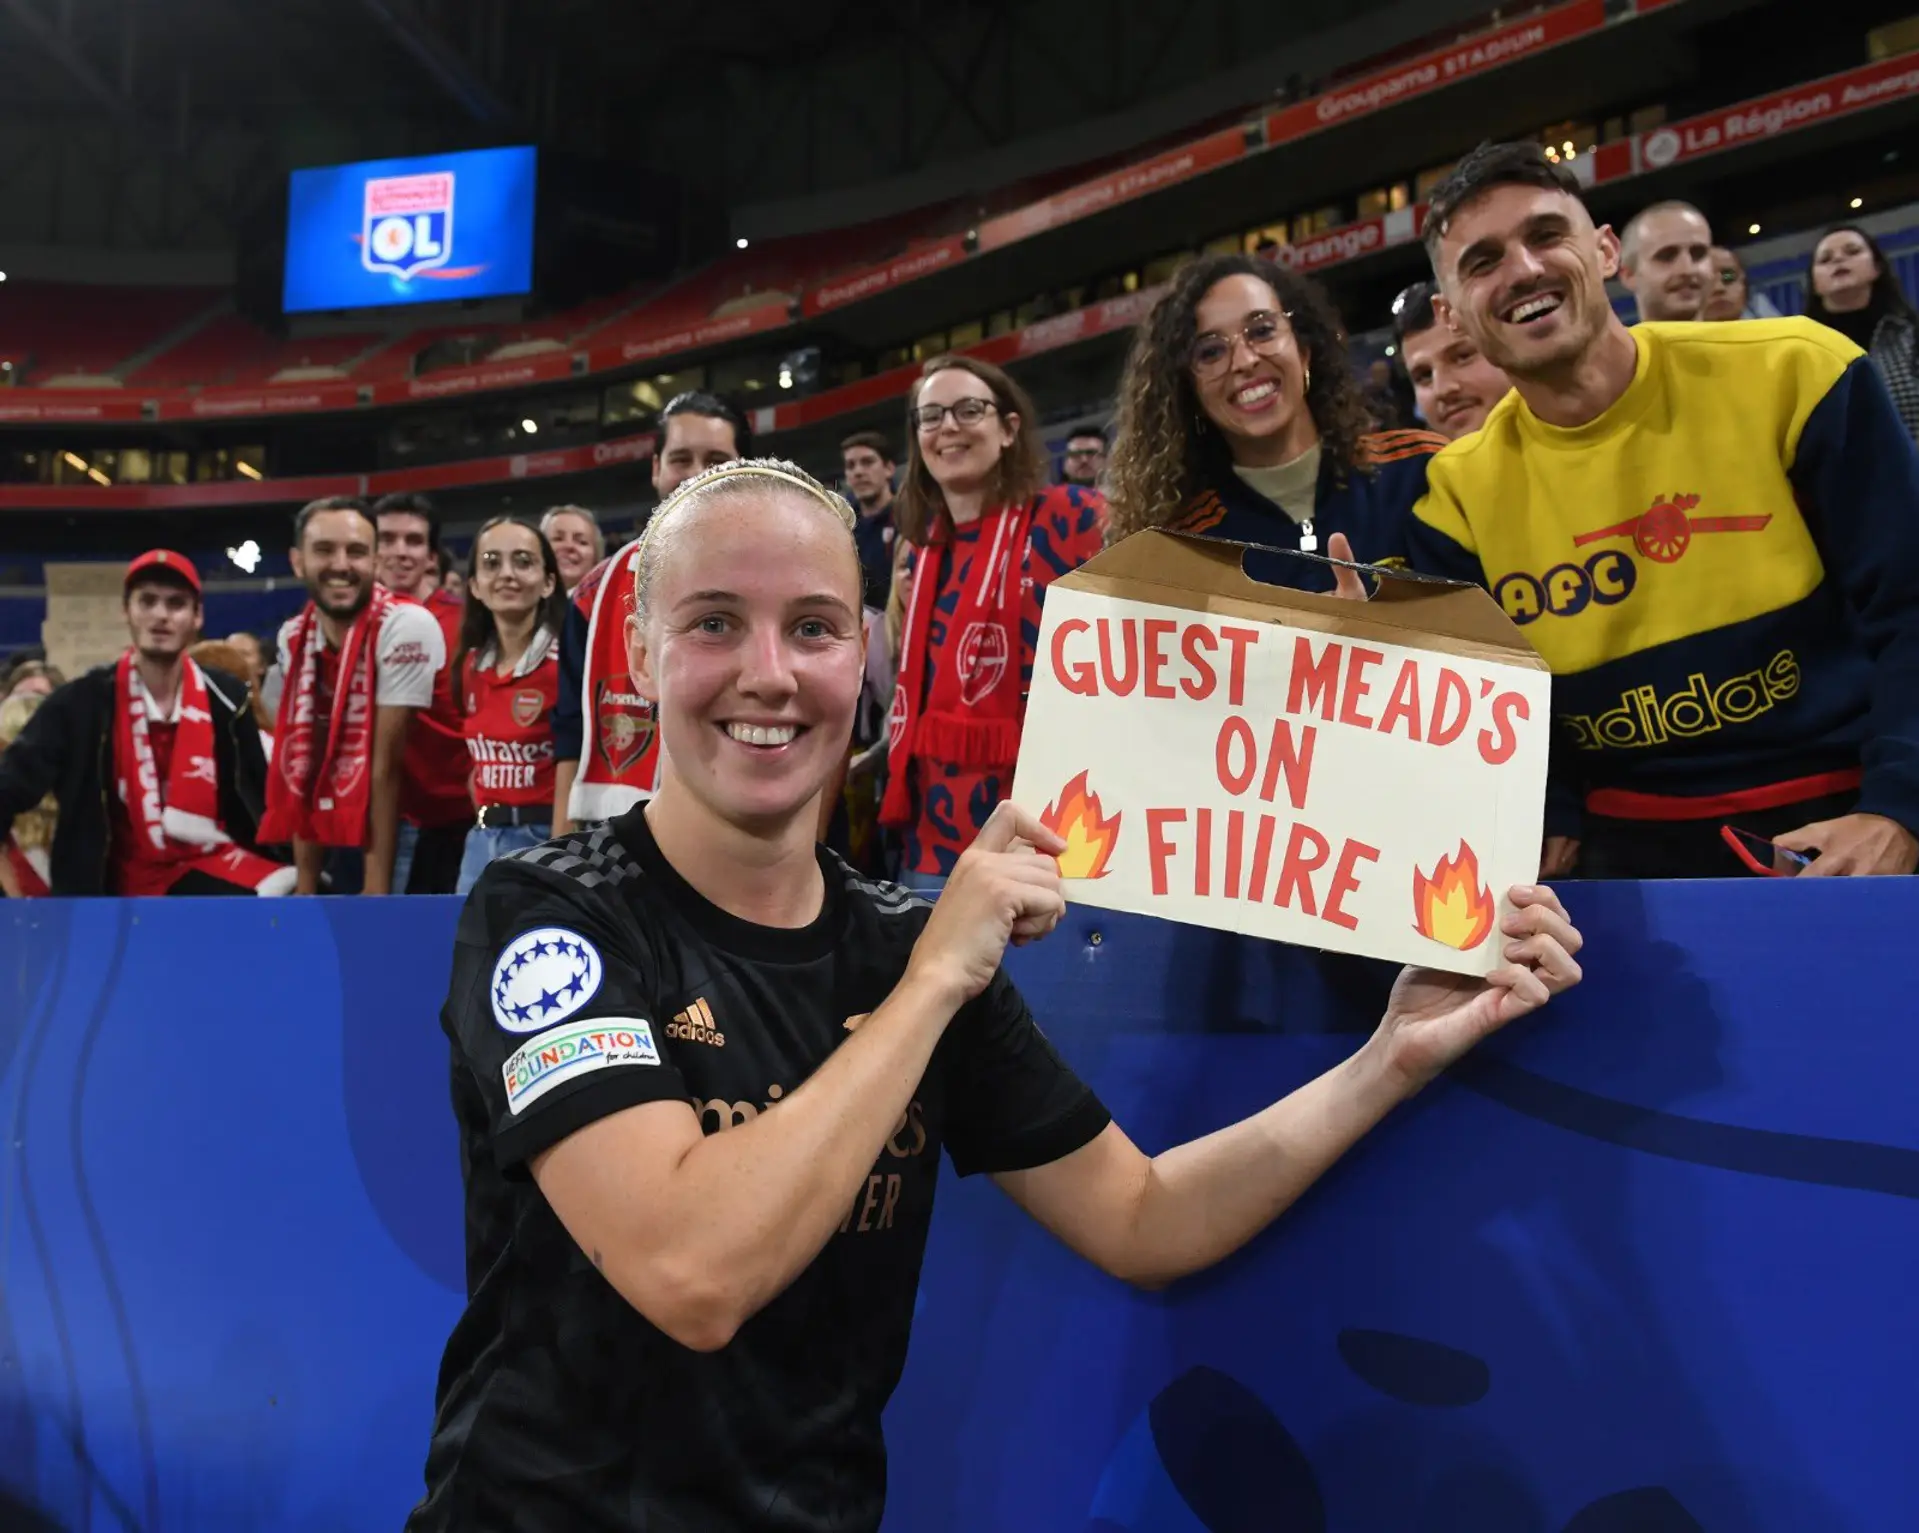 Arsenal women outclass Champions League holders & 2 more under-radar stories at Arsenal today